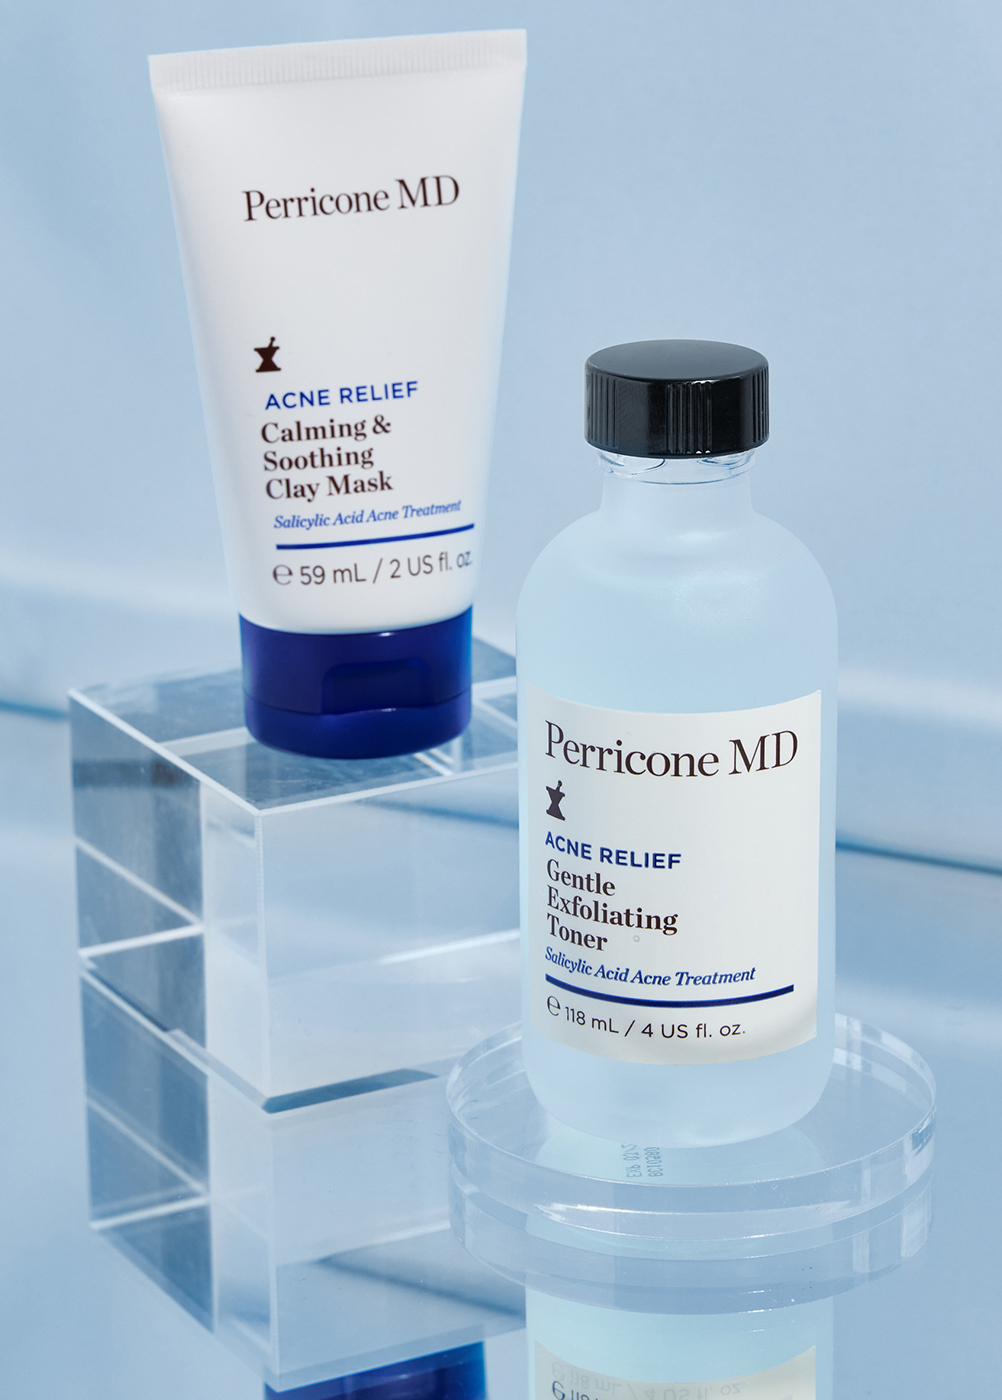 Perricone MD Acne Relief collection